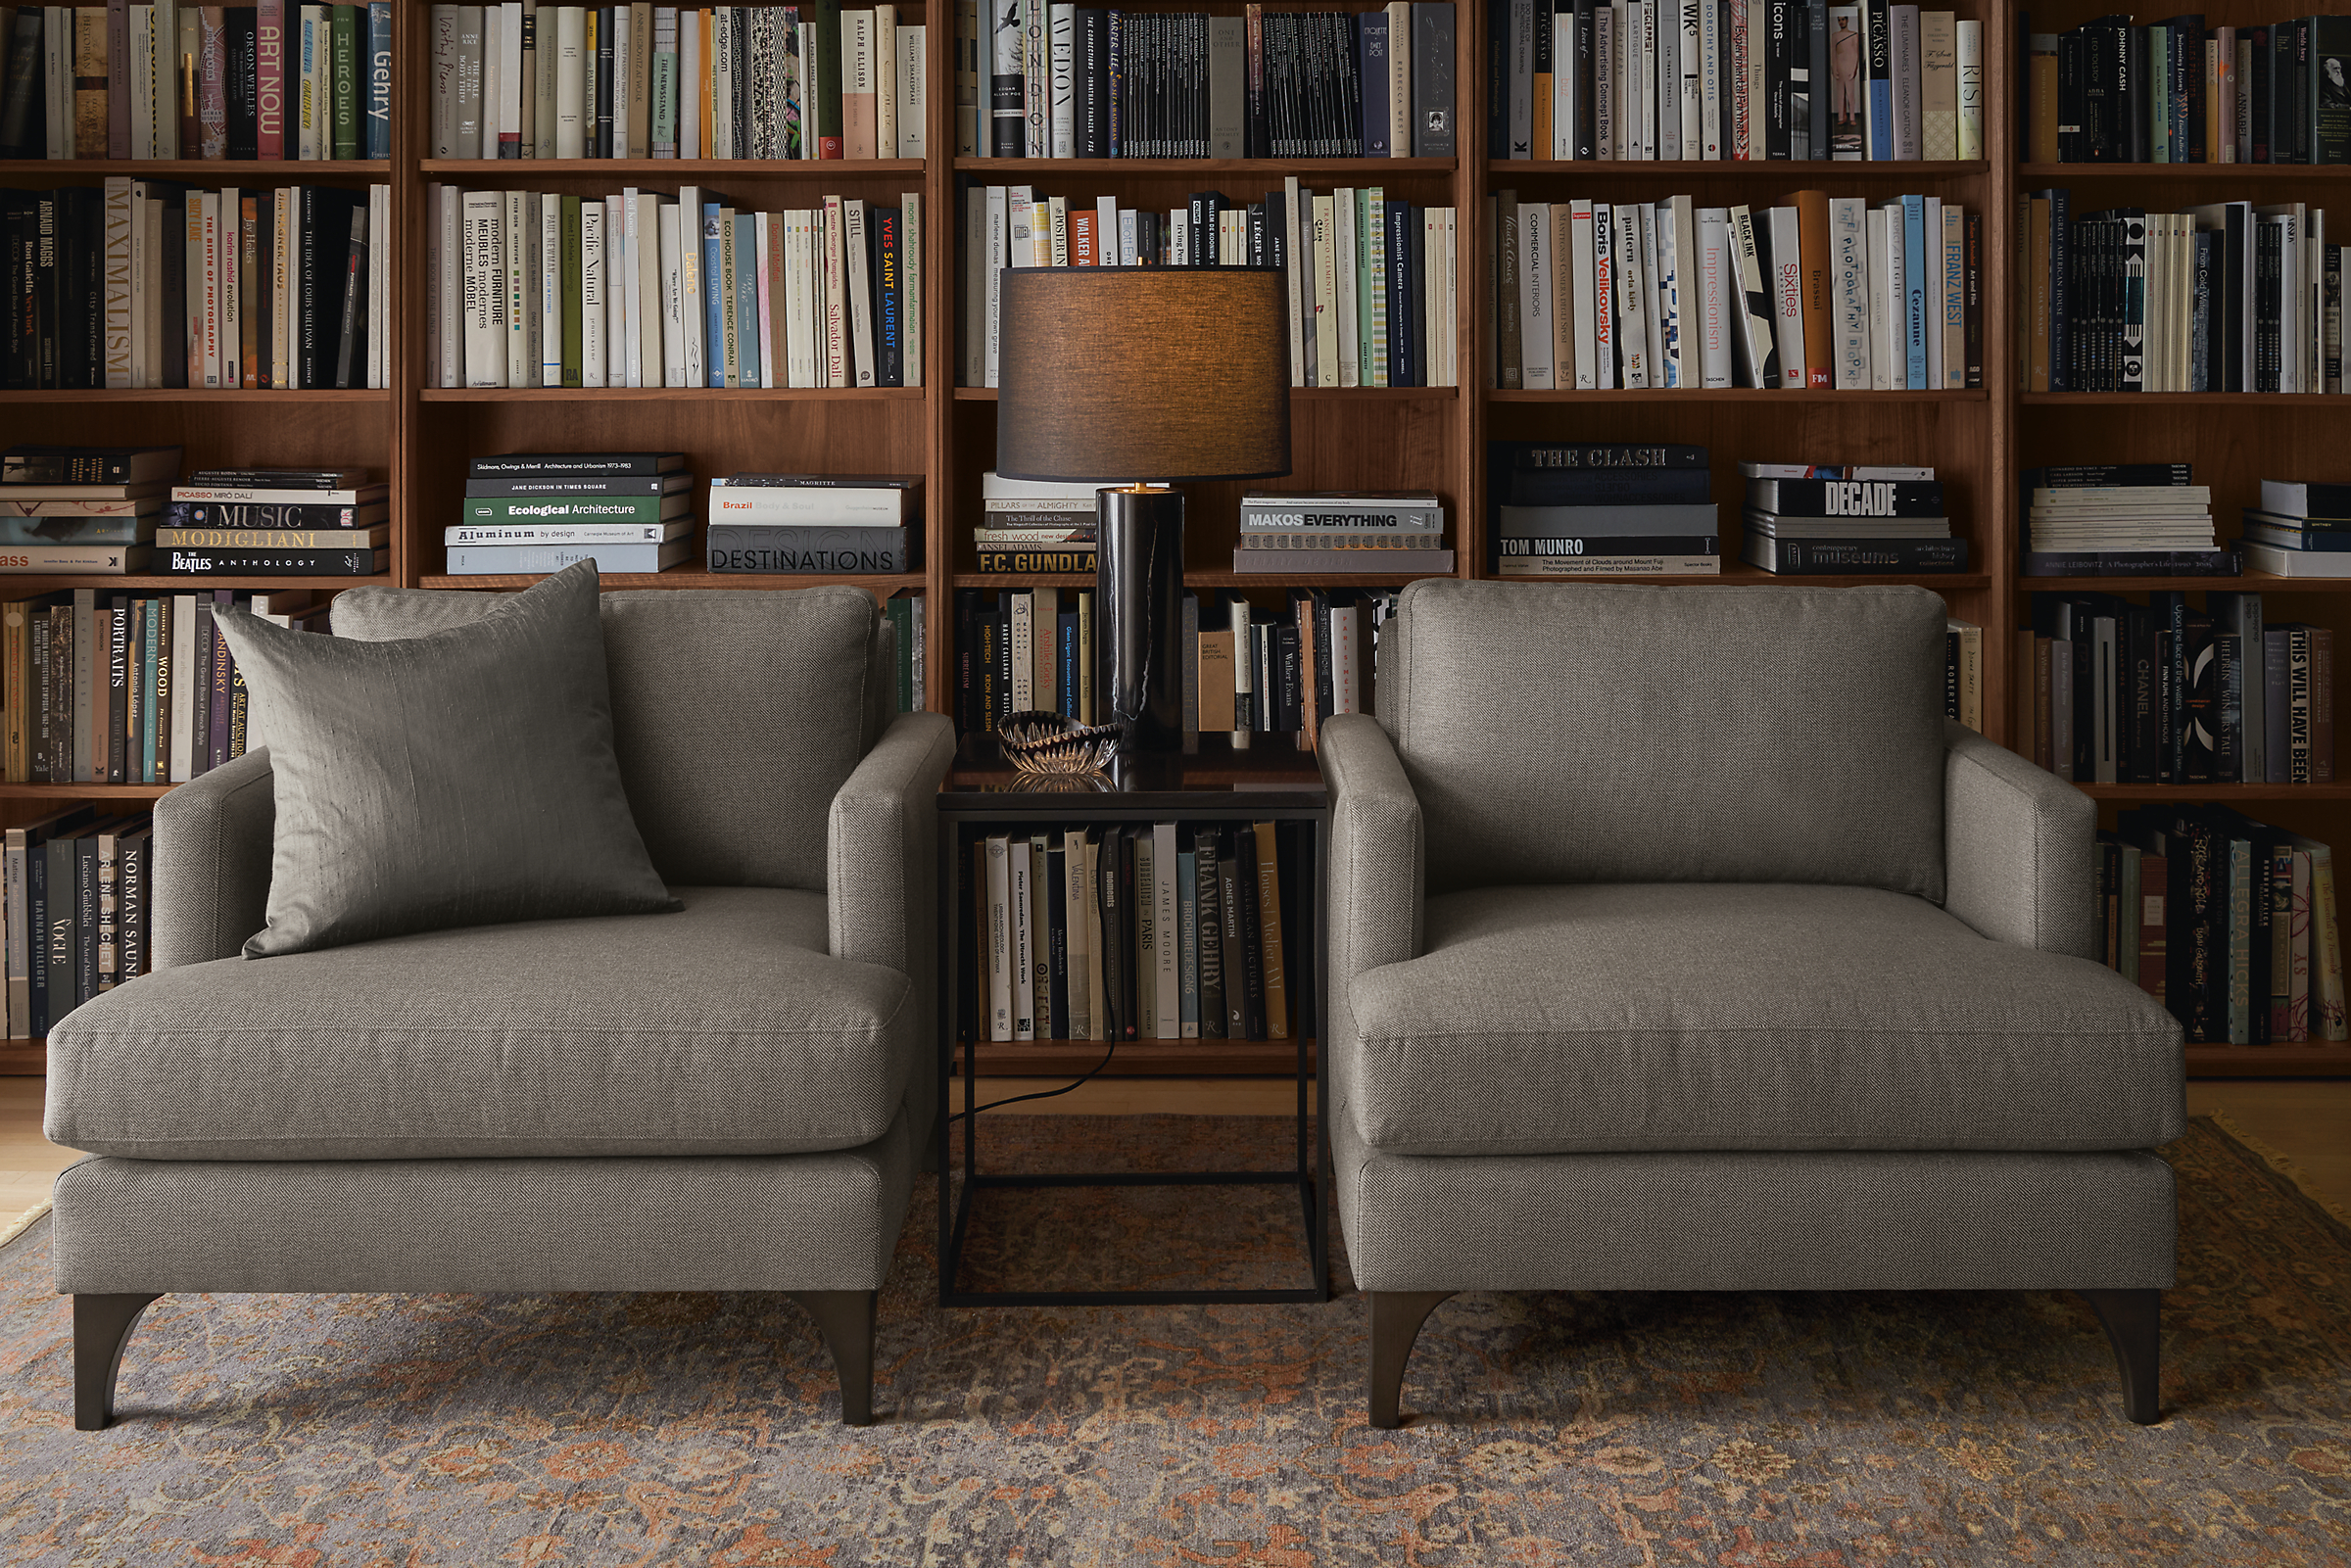 Living room library with a pair of Carlton chairs in Gino Coal fabric and Vesuvio rug in Grey/Charcoal.